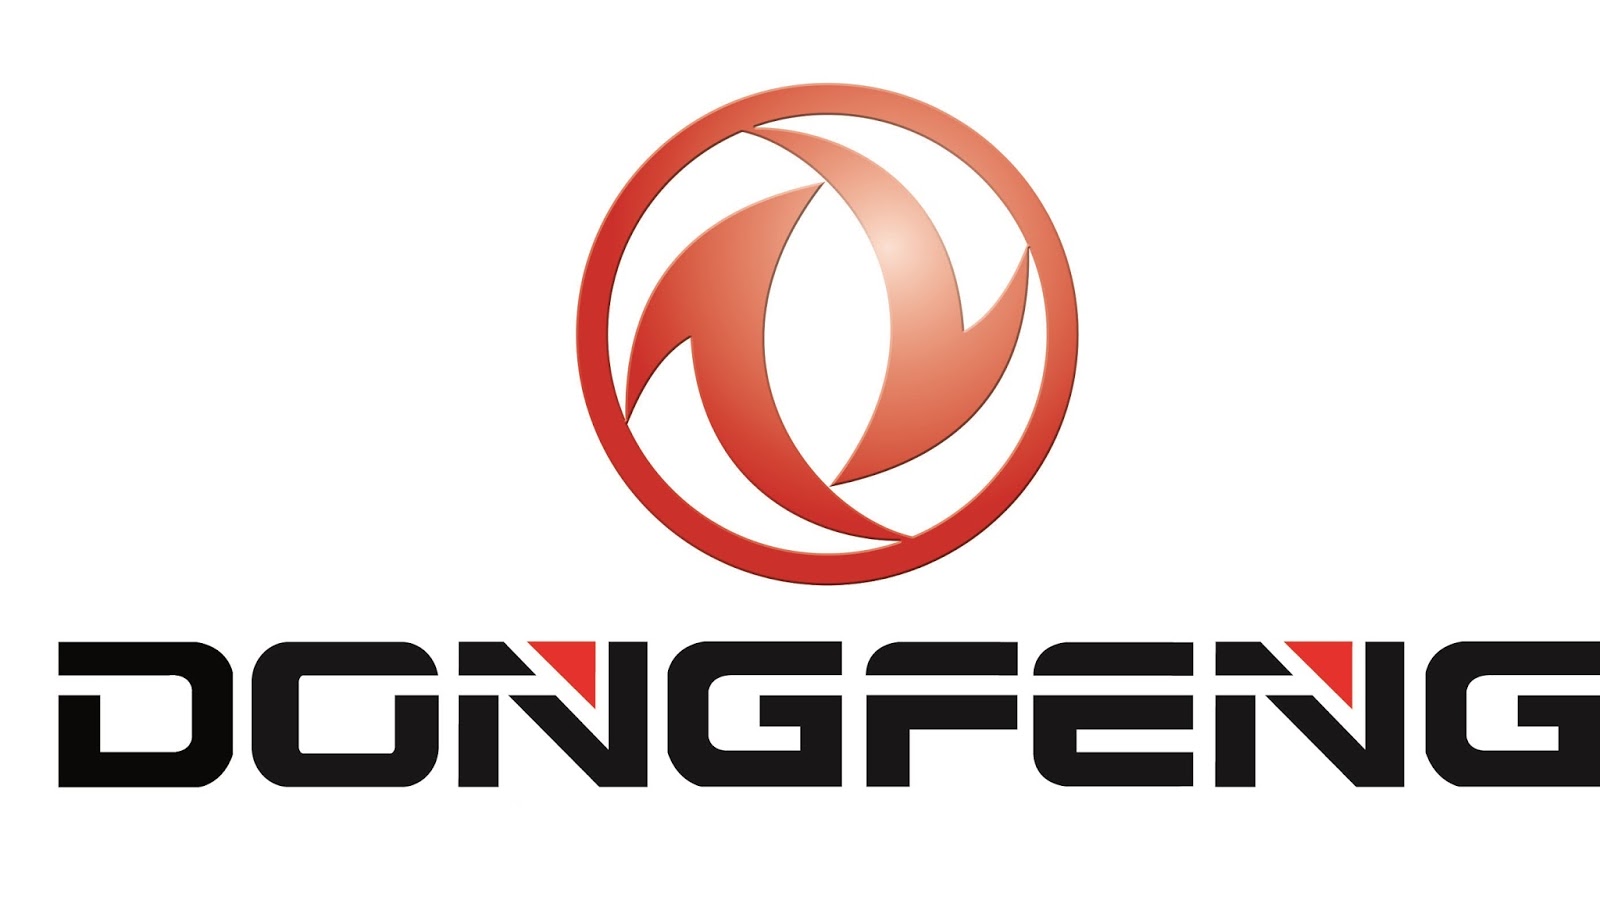 Dongfeng Costa Rica